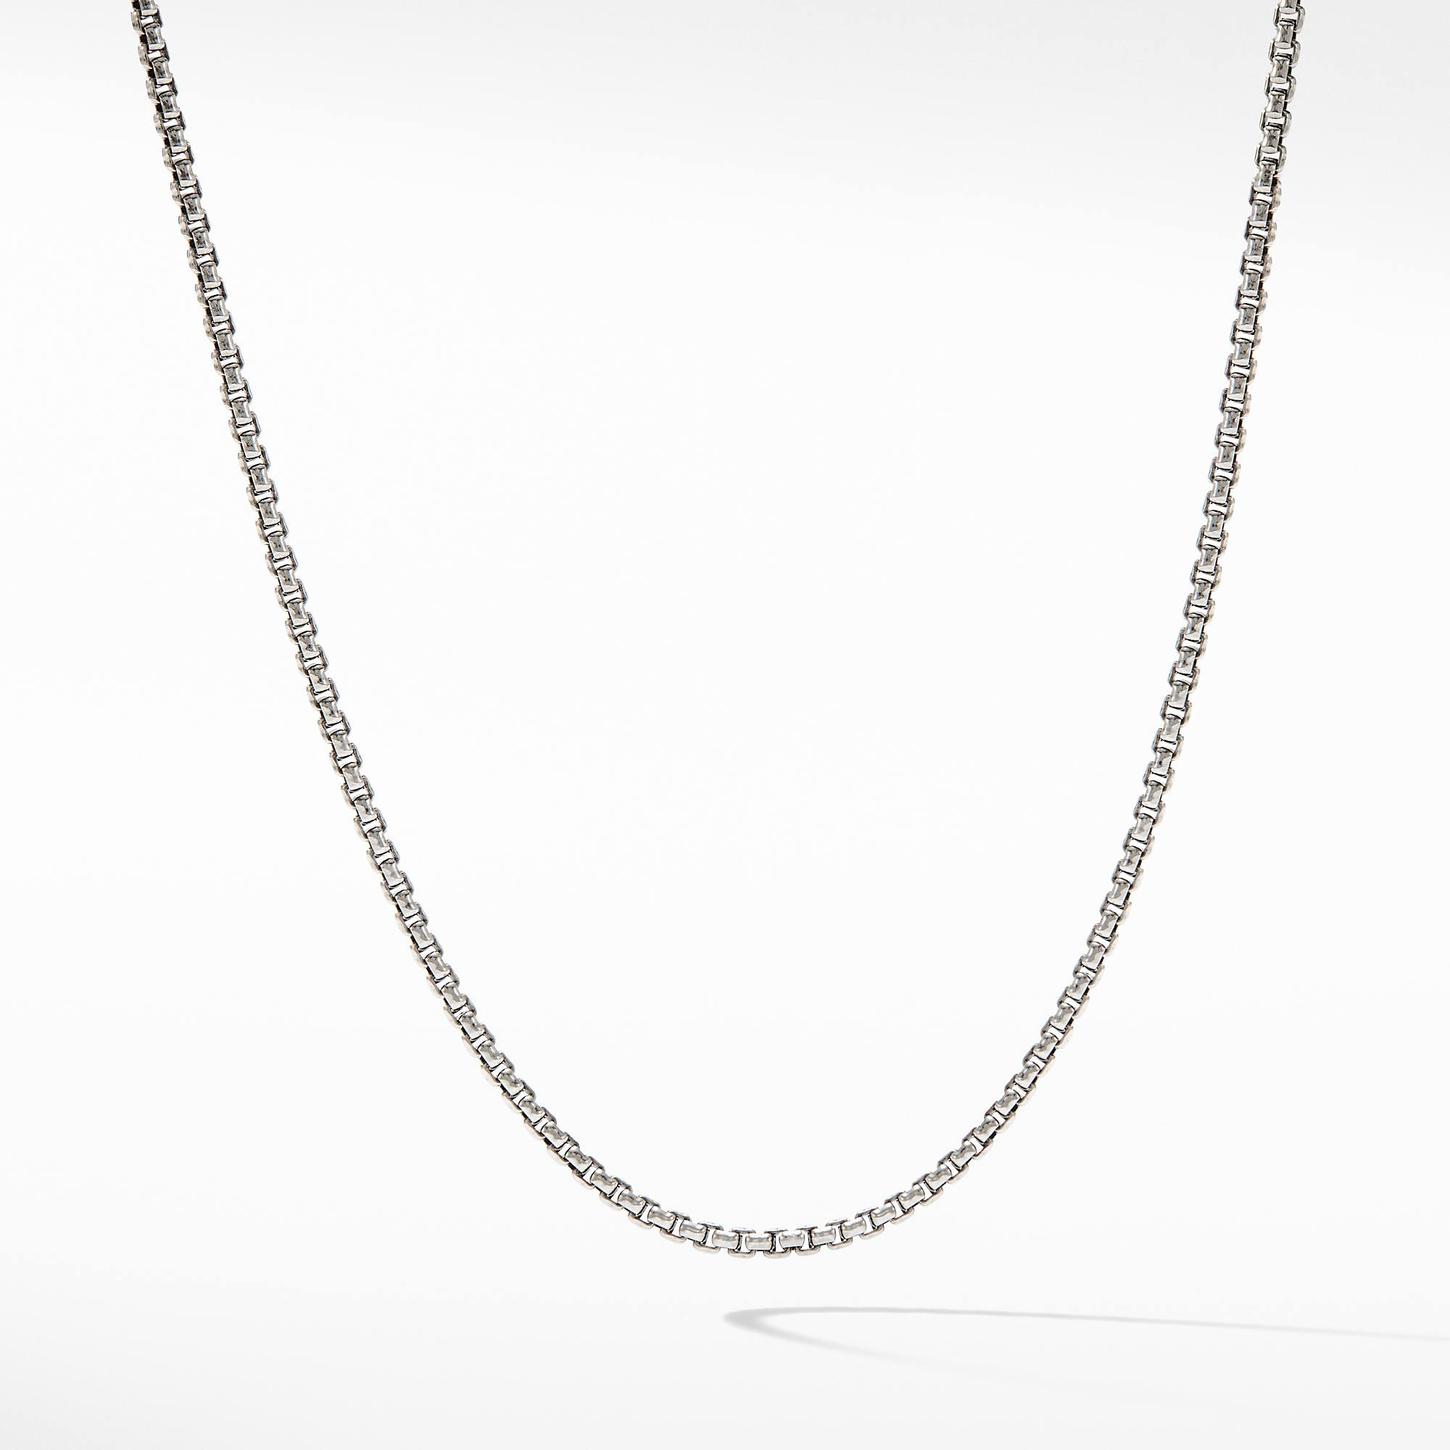 David Yurman Baby Box Chain Necklace in Sterling Silver and 14K Yellow Gold 0